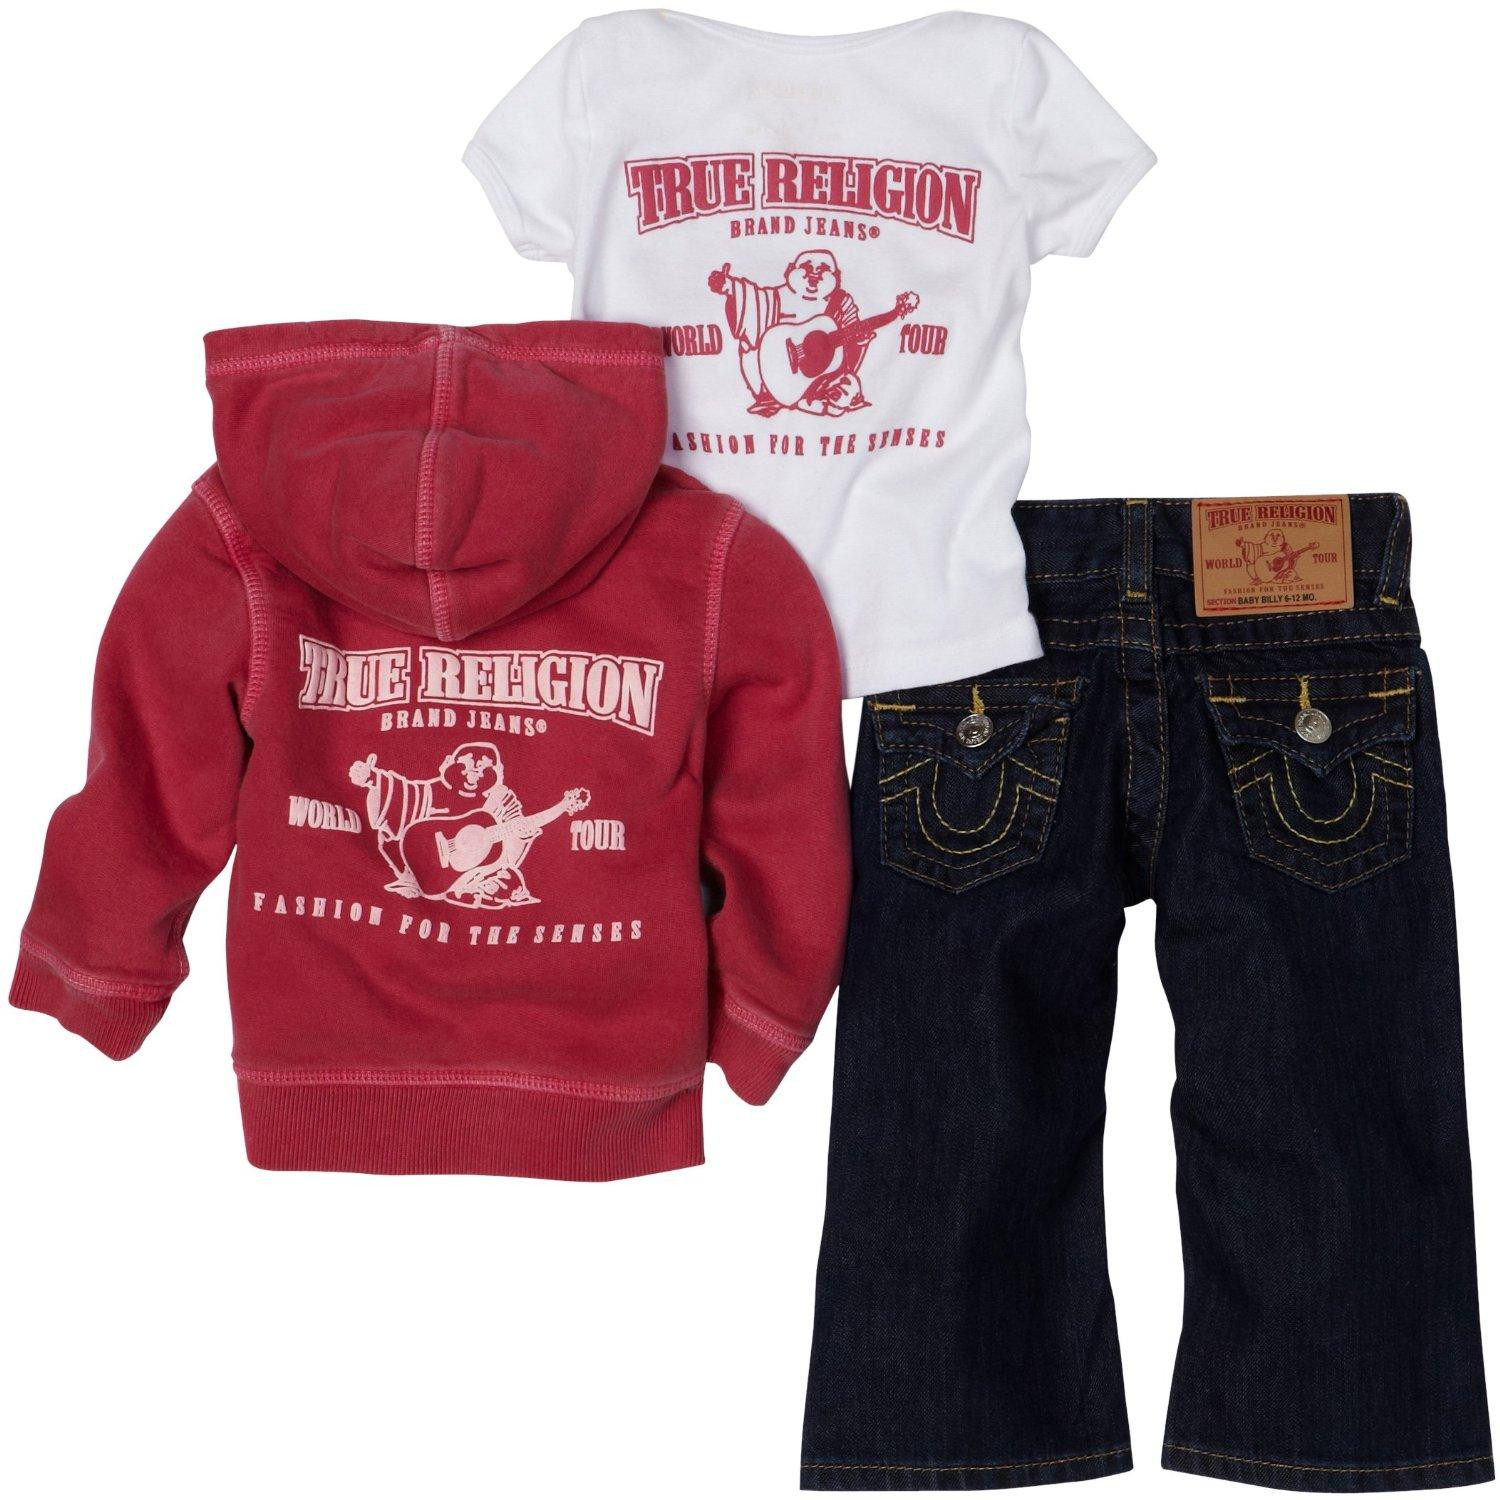 Baby True Religion Gift Sets
 Discounted True Religion Baby 3 Piece Gift Box Set